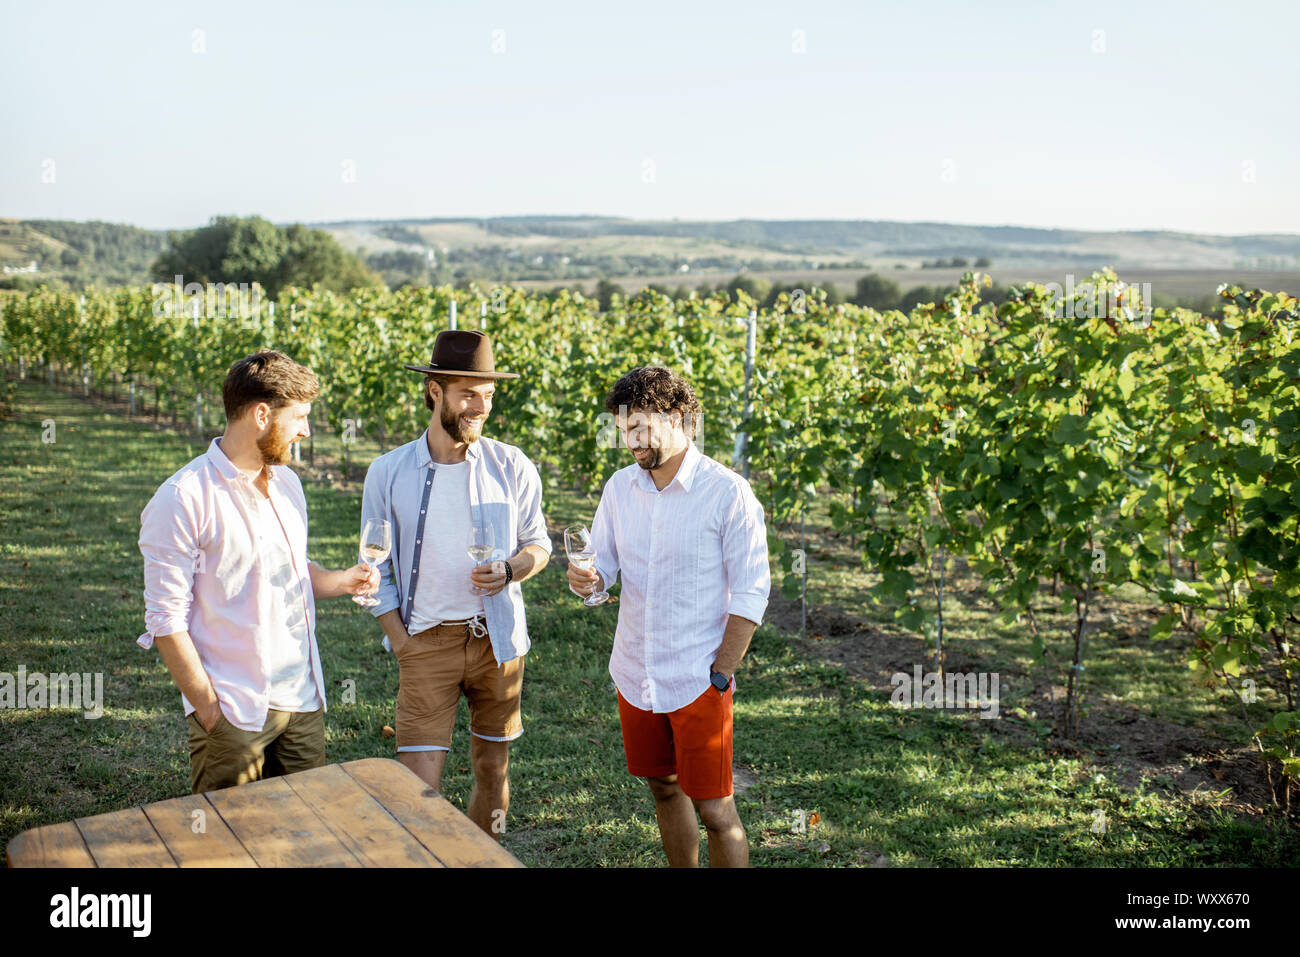 Three guys dressed casually tasting wine while spending time together on the vineyard on a sunny summer morning Stock Photo